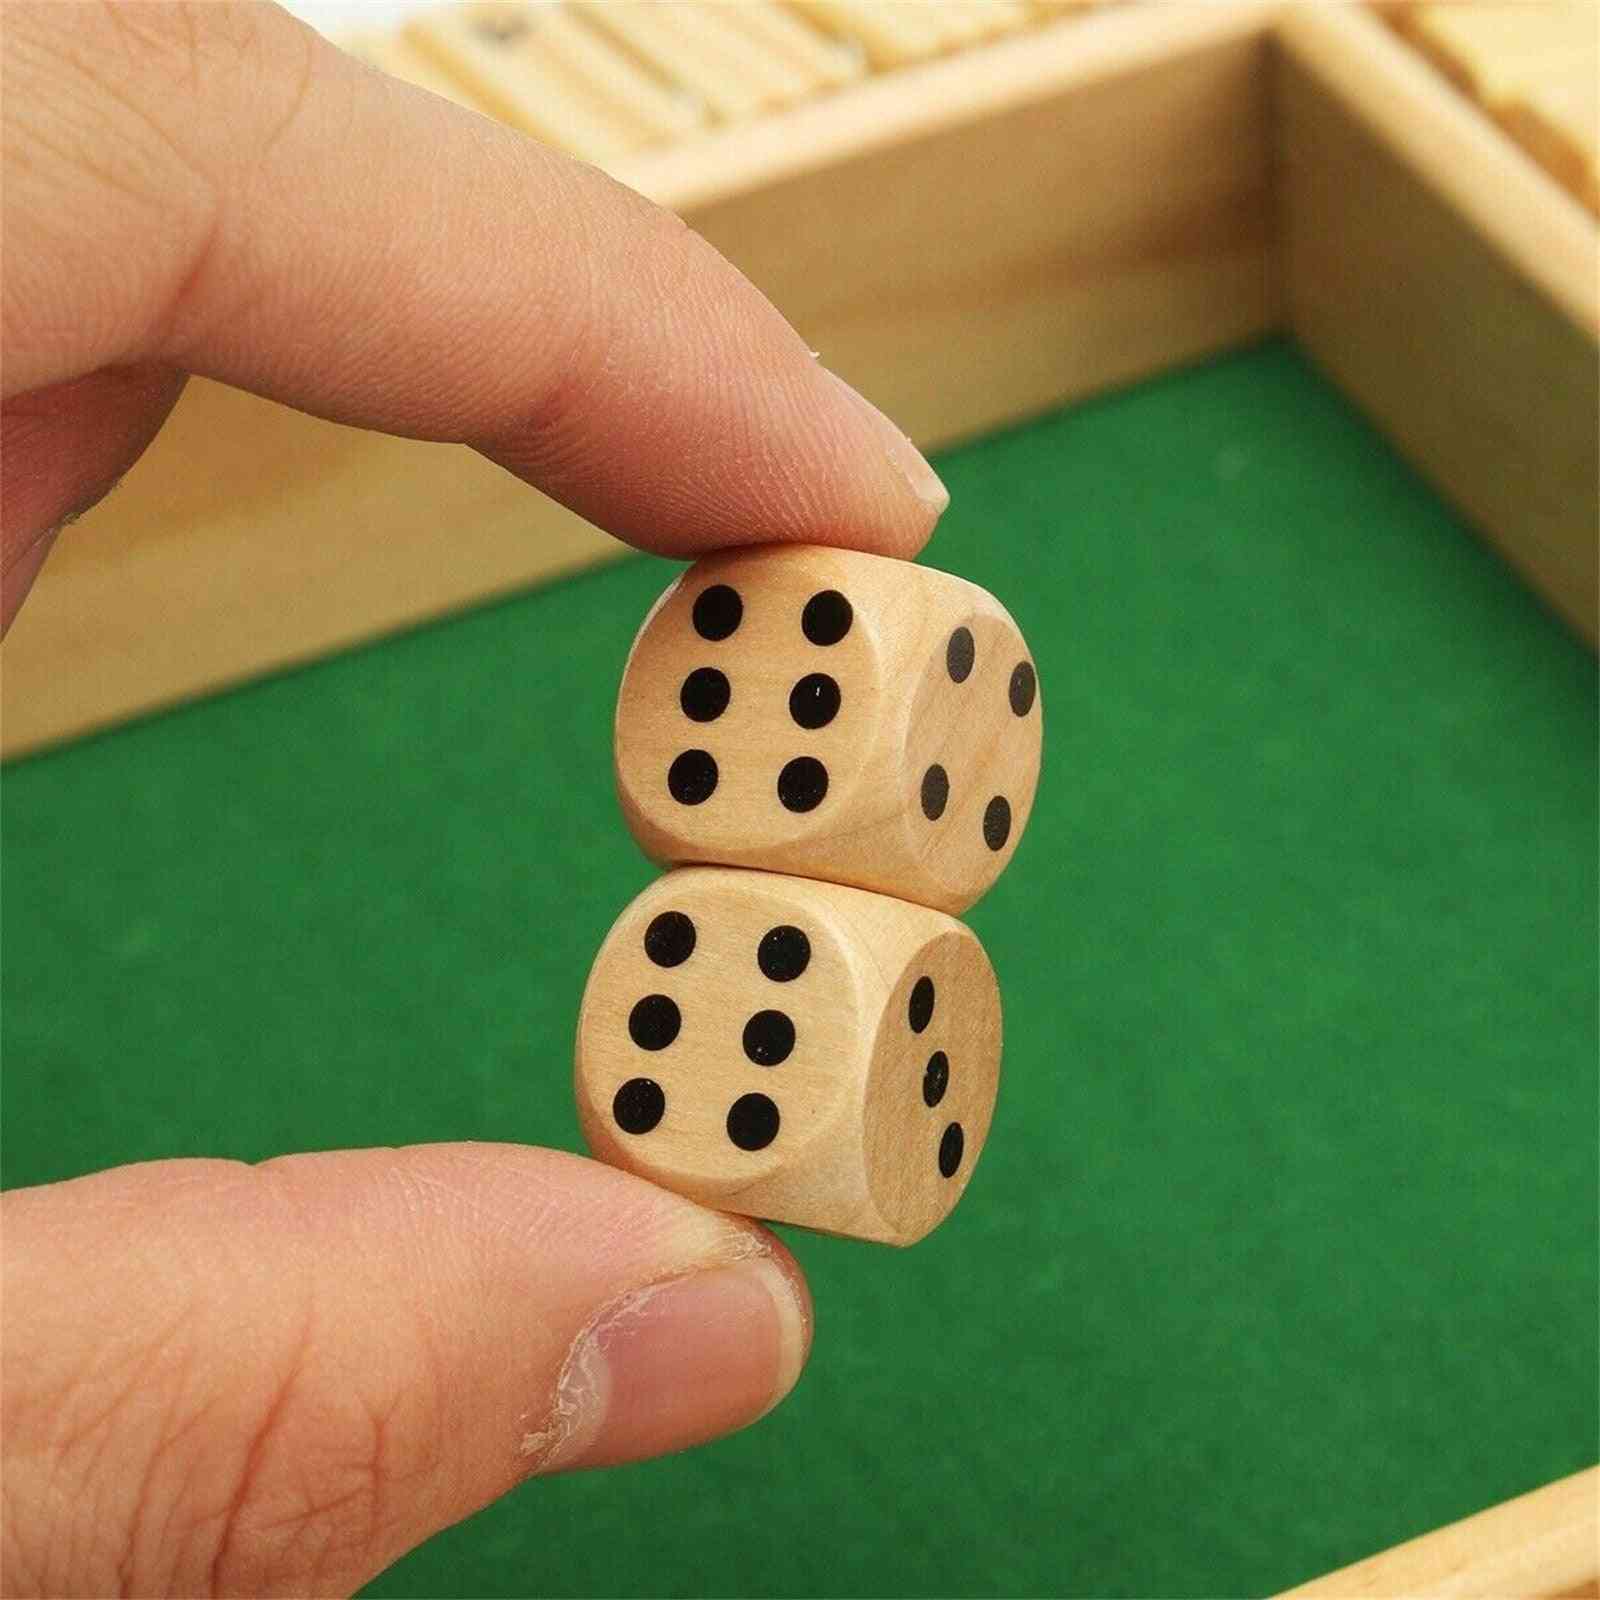 Shut The Box Dice Board Game Four Sided 4 Players Digital Puzzle Fun Game